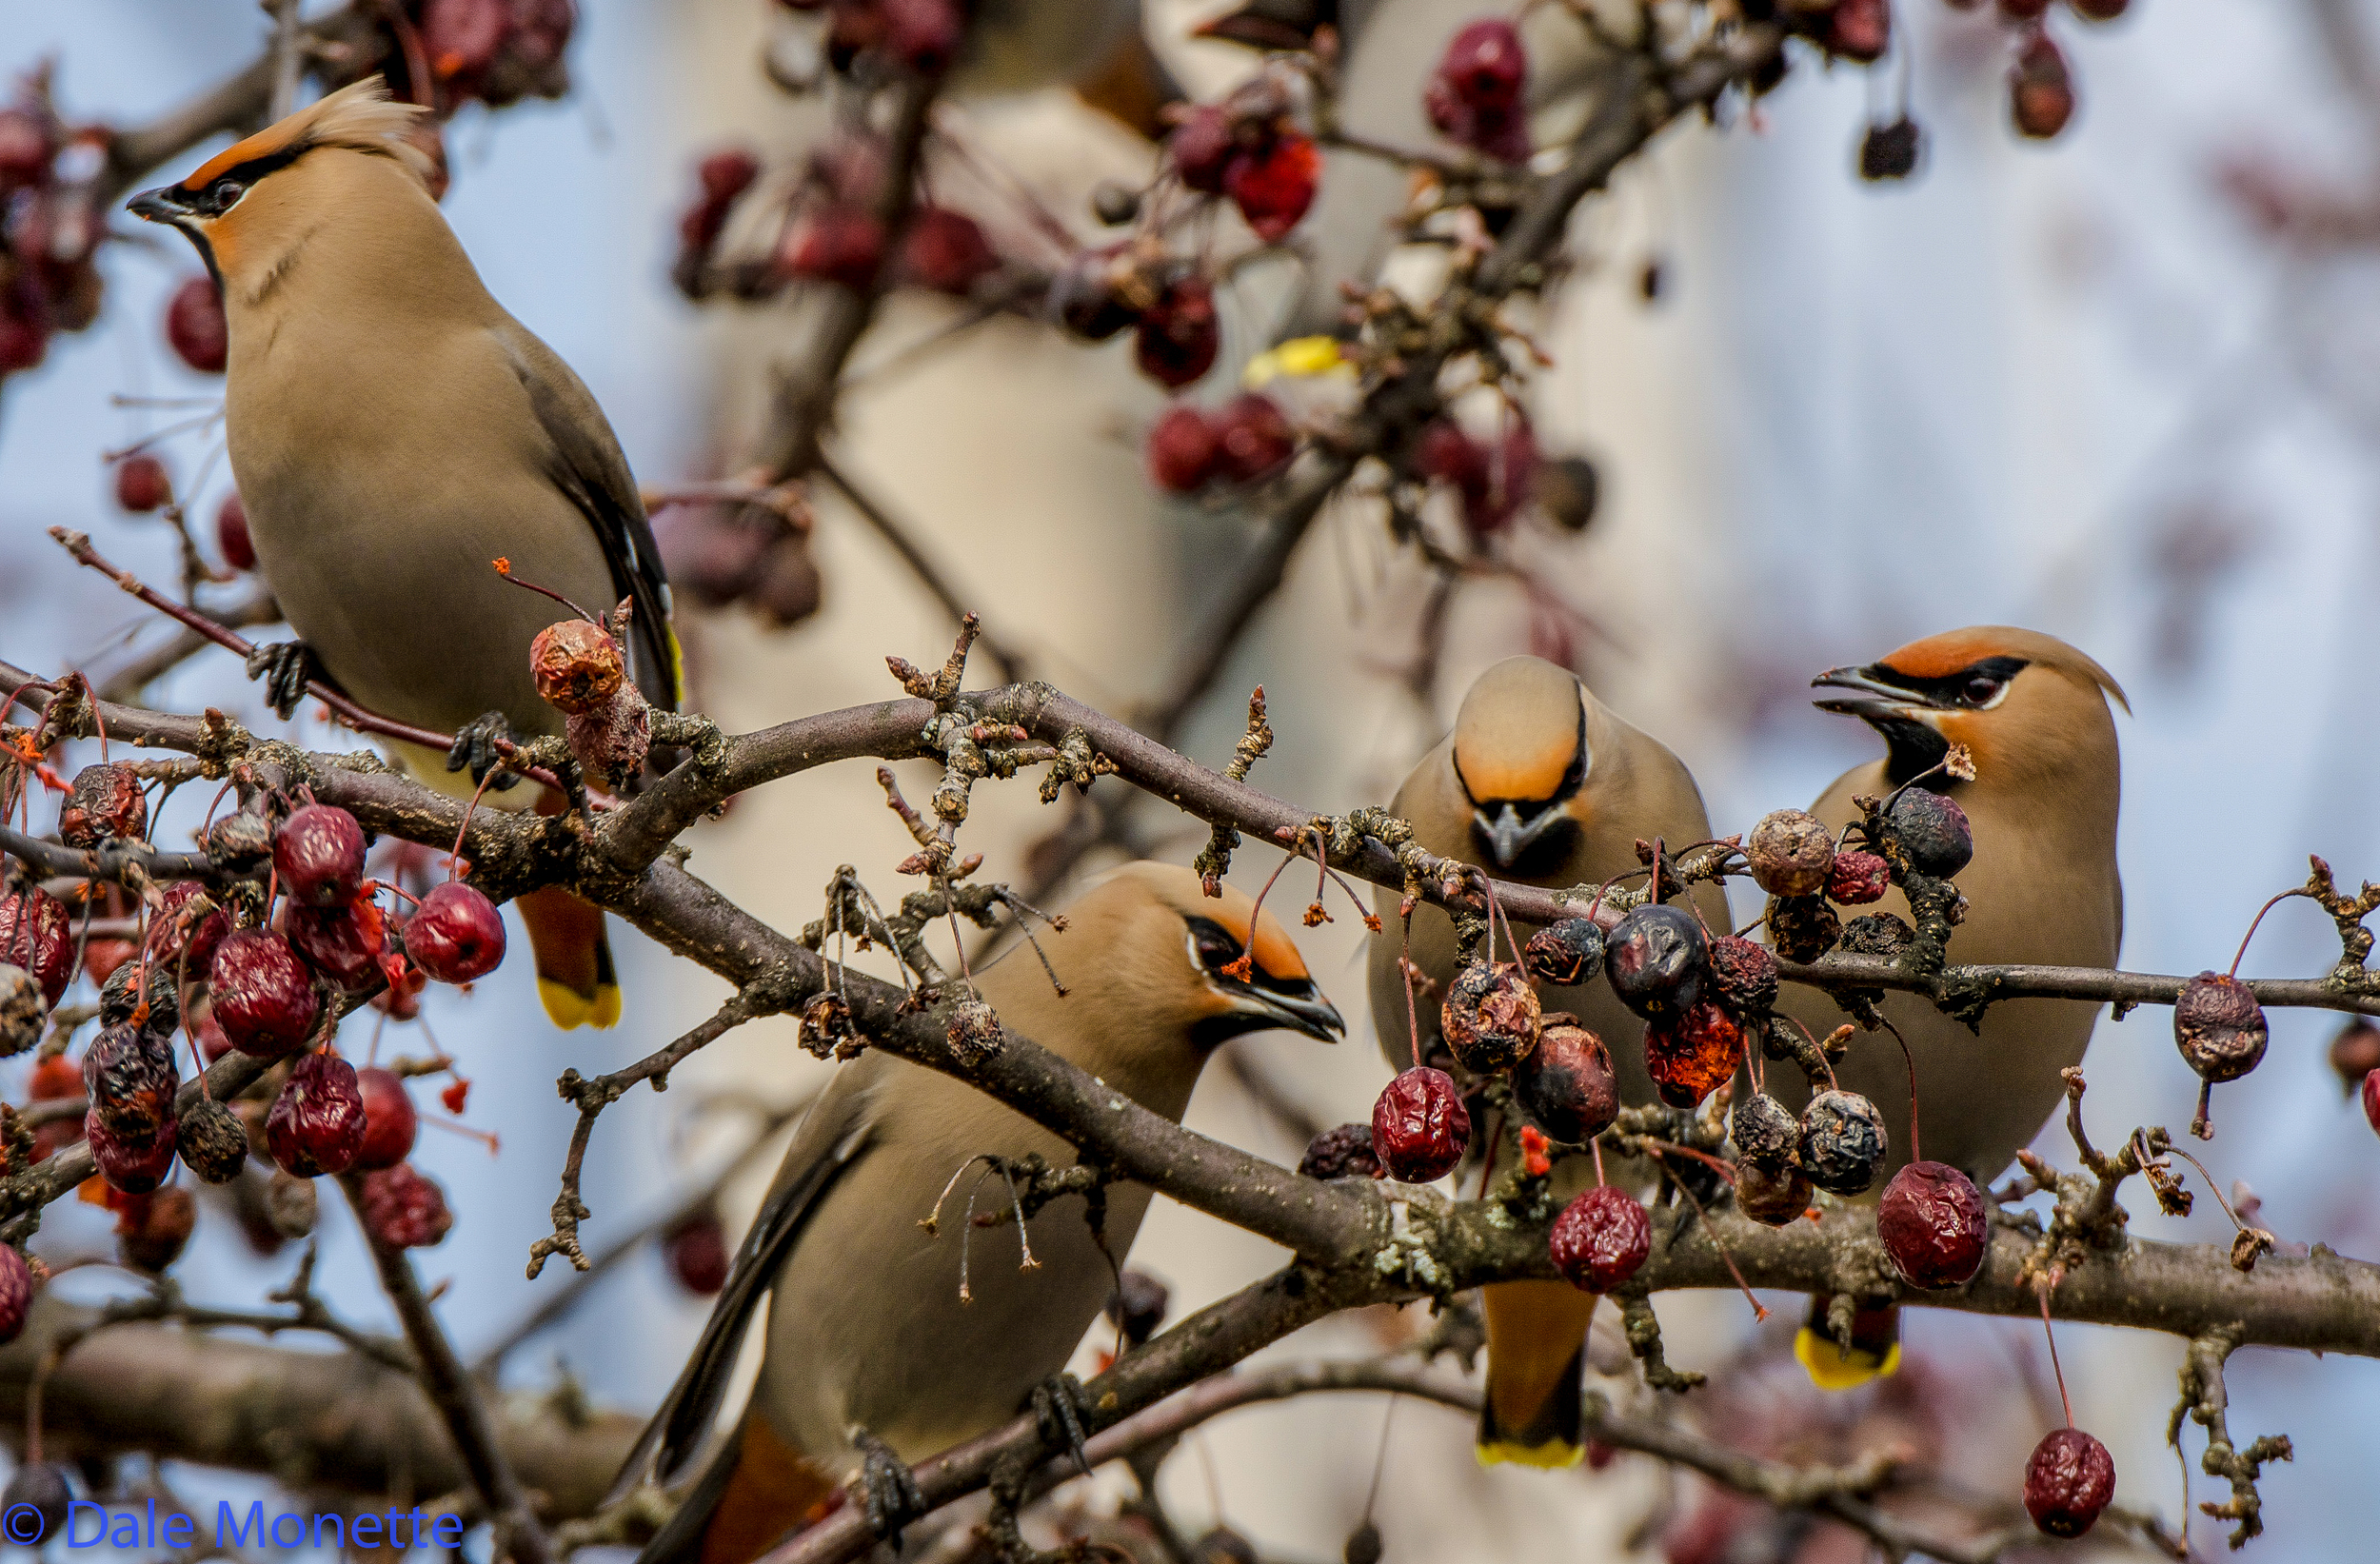 Another Bohemian waxwing photo.